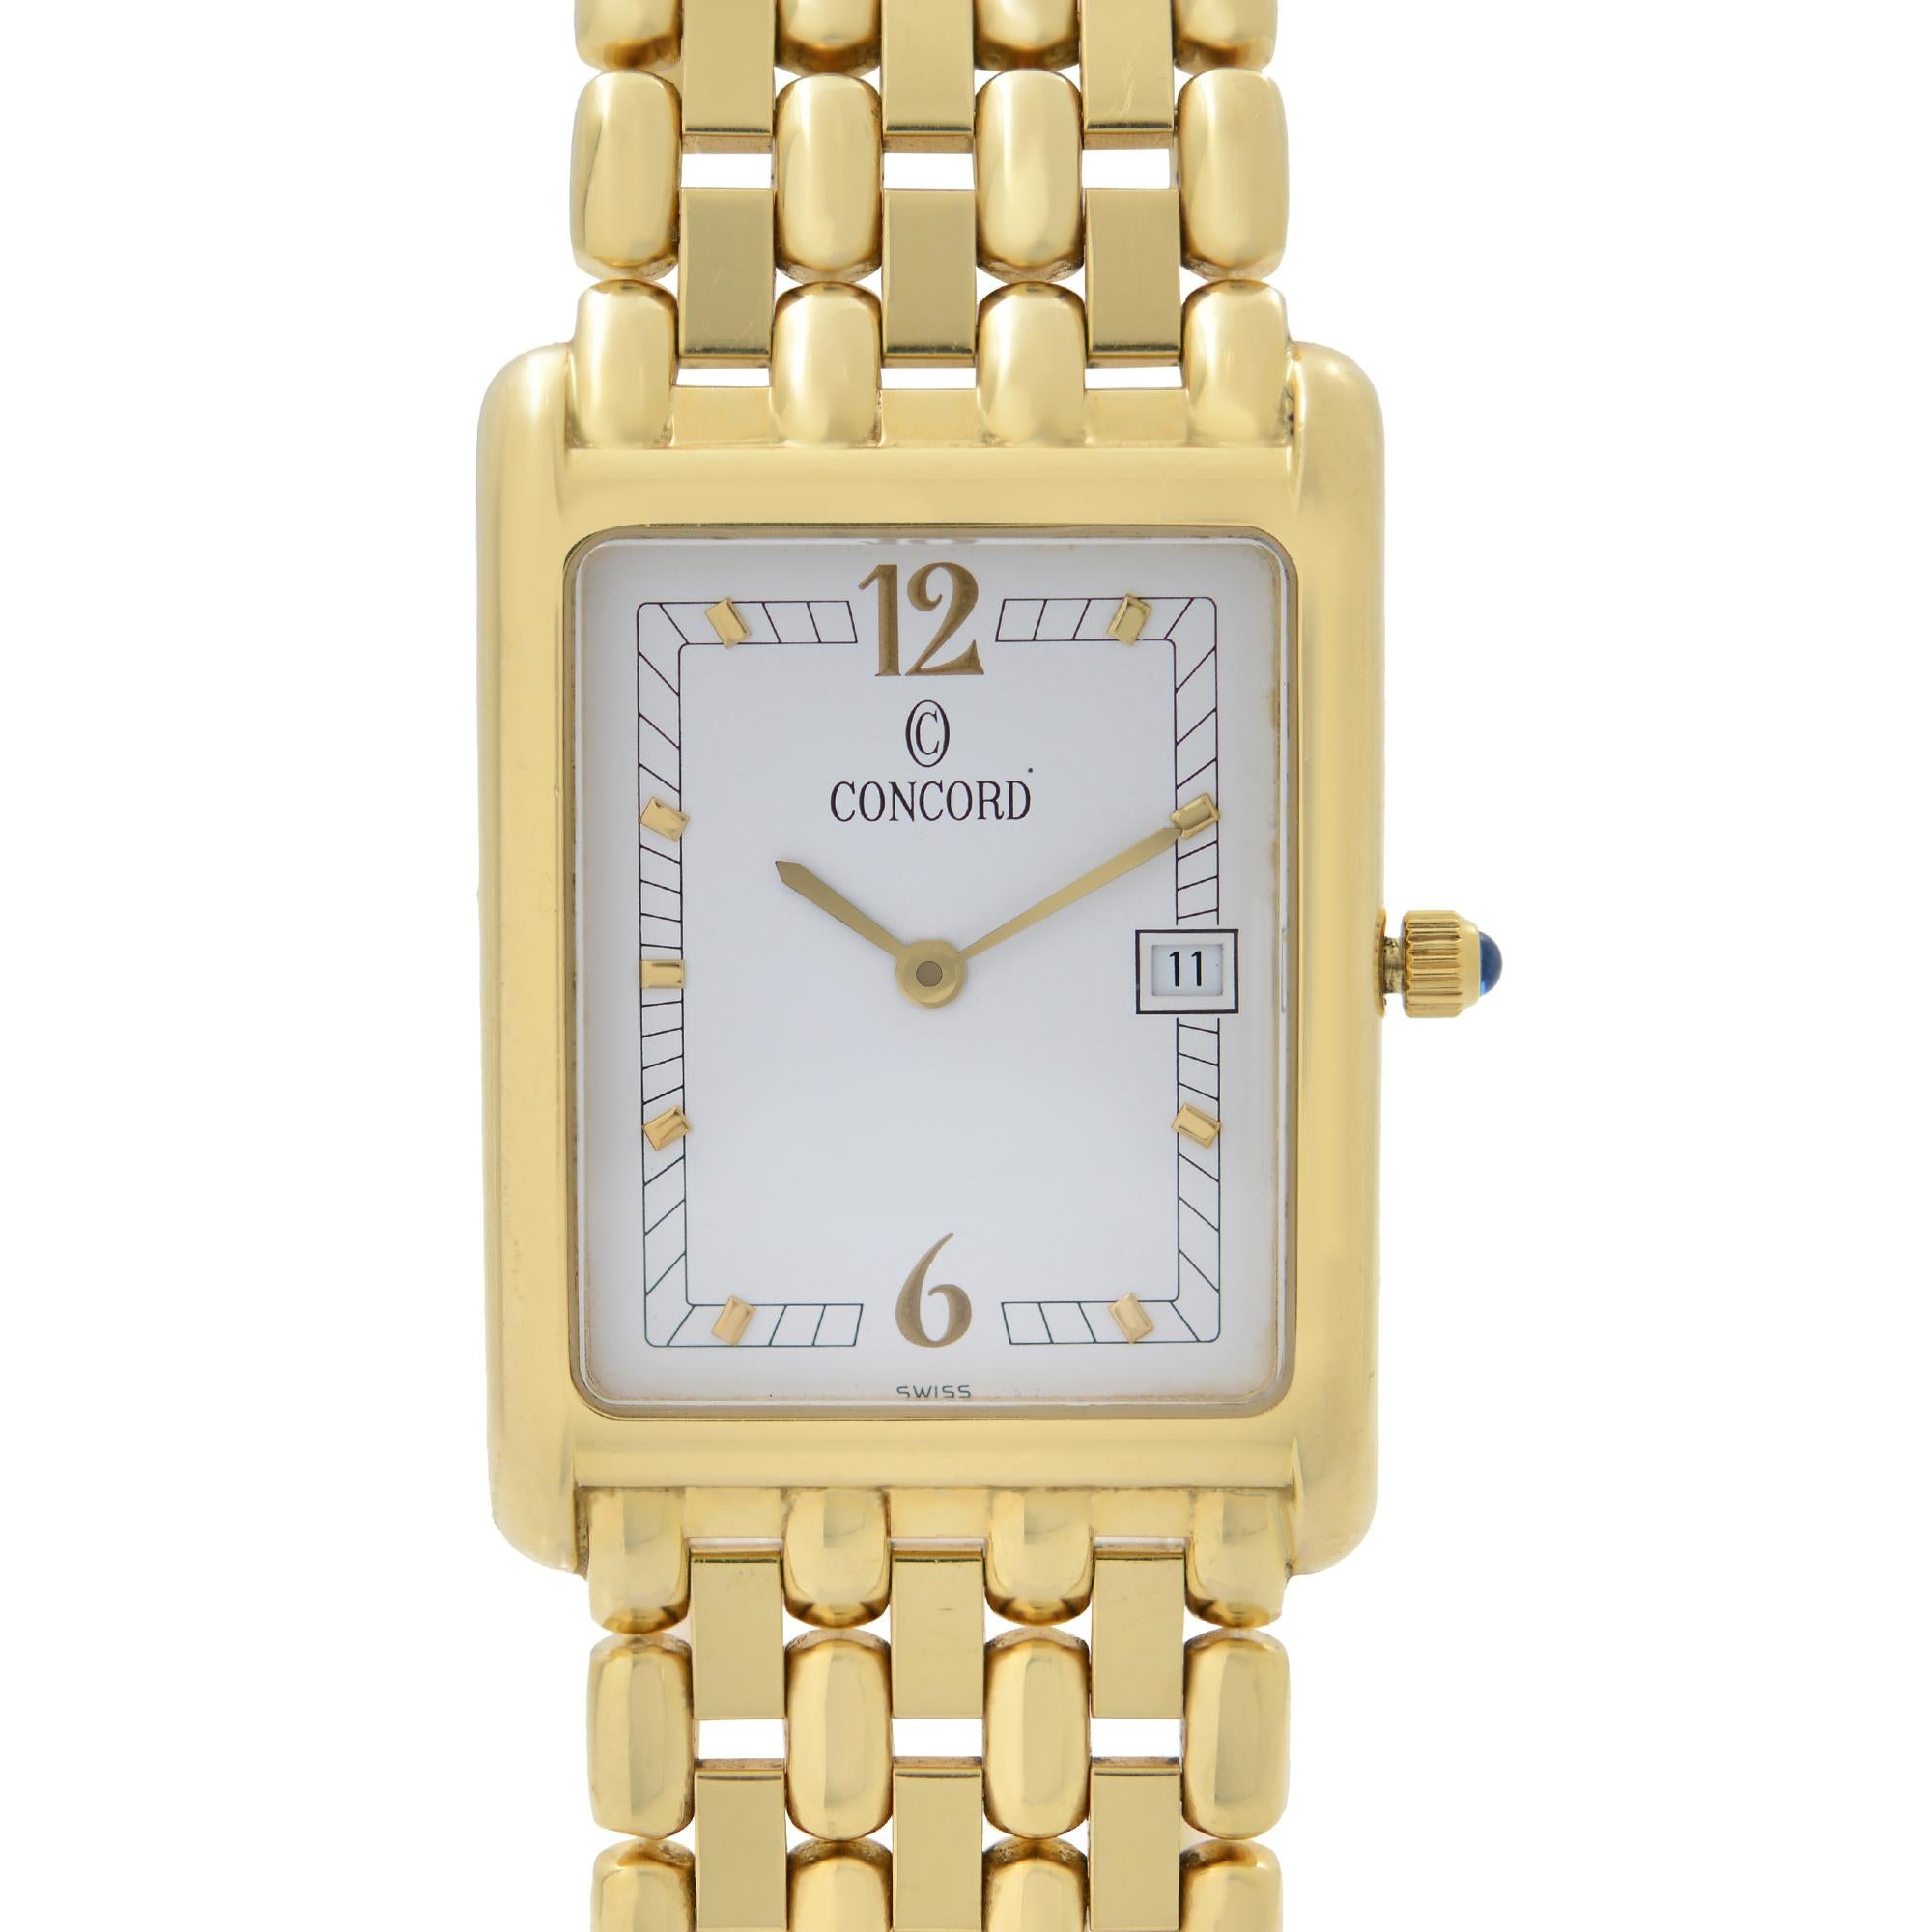 Pre Owned Concord Veneto 18K Yellow Gold White Dial Quartz Analogue Luxury Men's Watch 50.46.625. This Beautiful Timepiece is Powered by Quartz (Battery) Movement And Features: Rectangular 18k Yellow Gold Case & Bracelet, Fixed 18k Gold Bezel, White